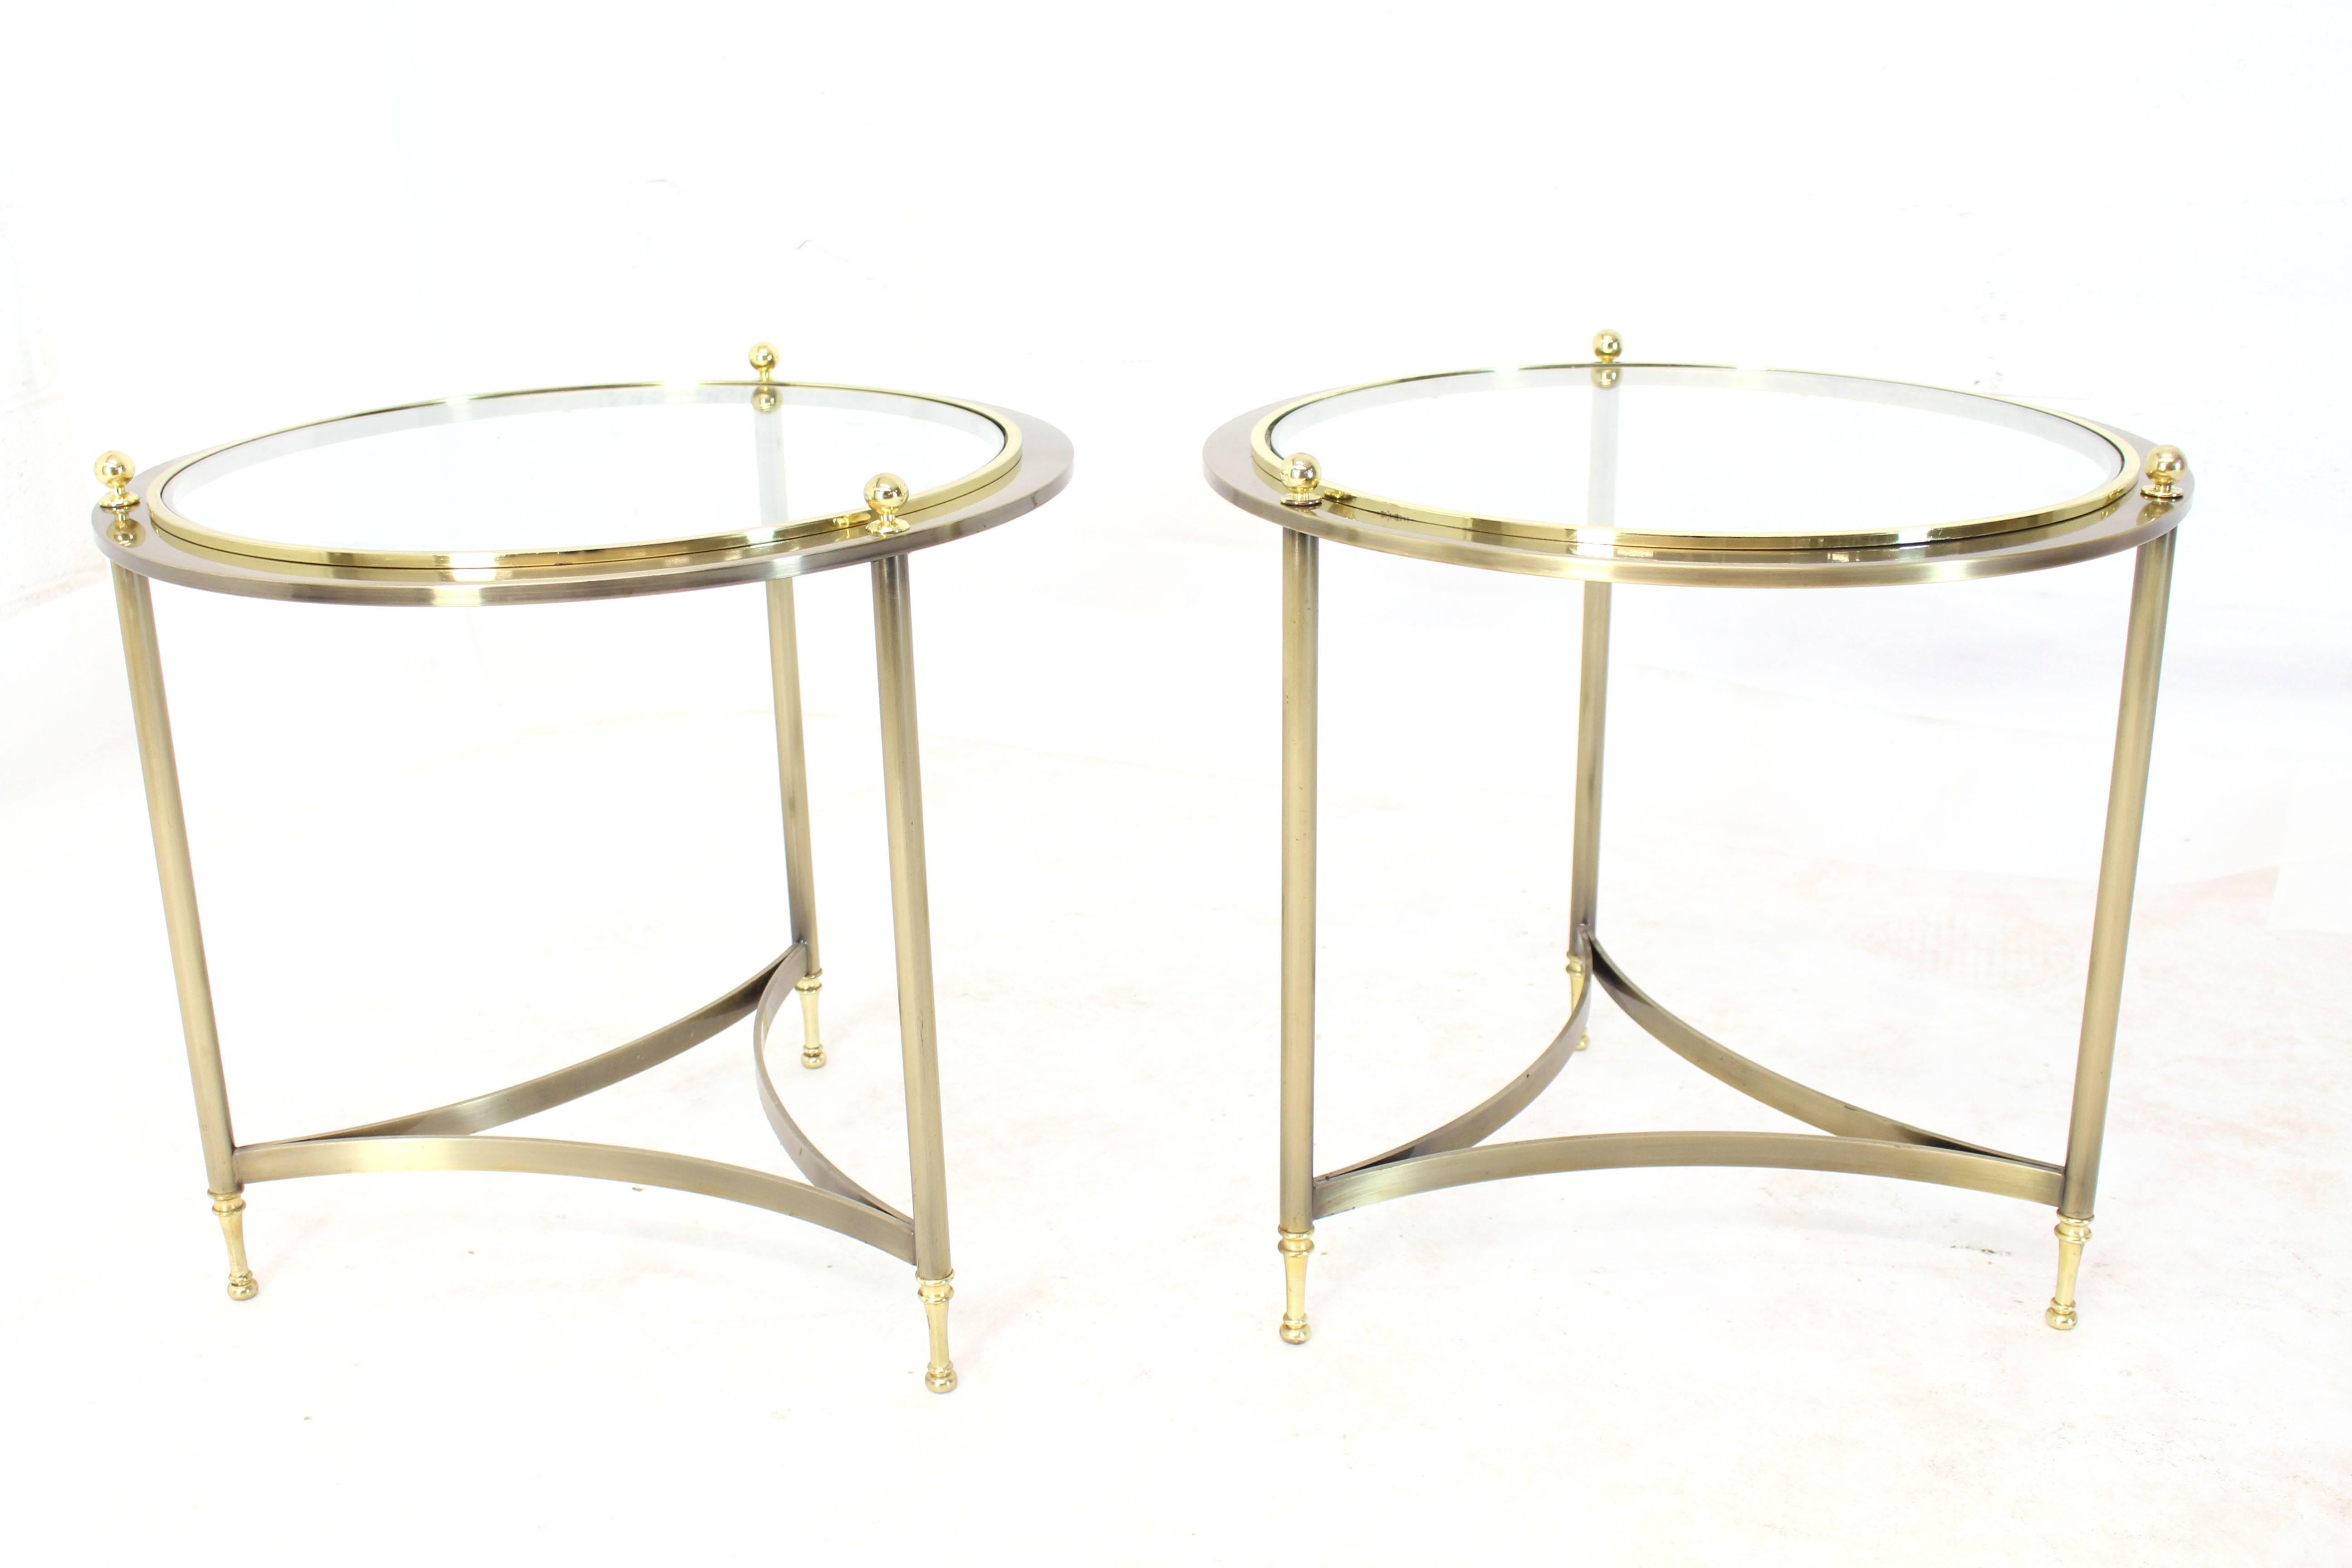 20th Century Pair of Round Side End Tables with Glass Tops by DIA